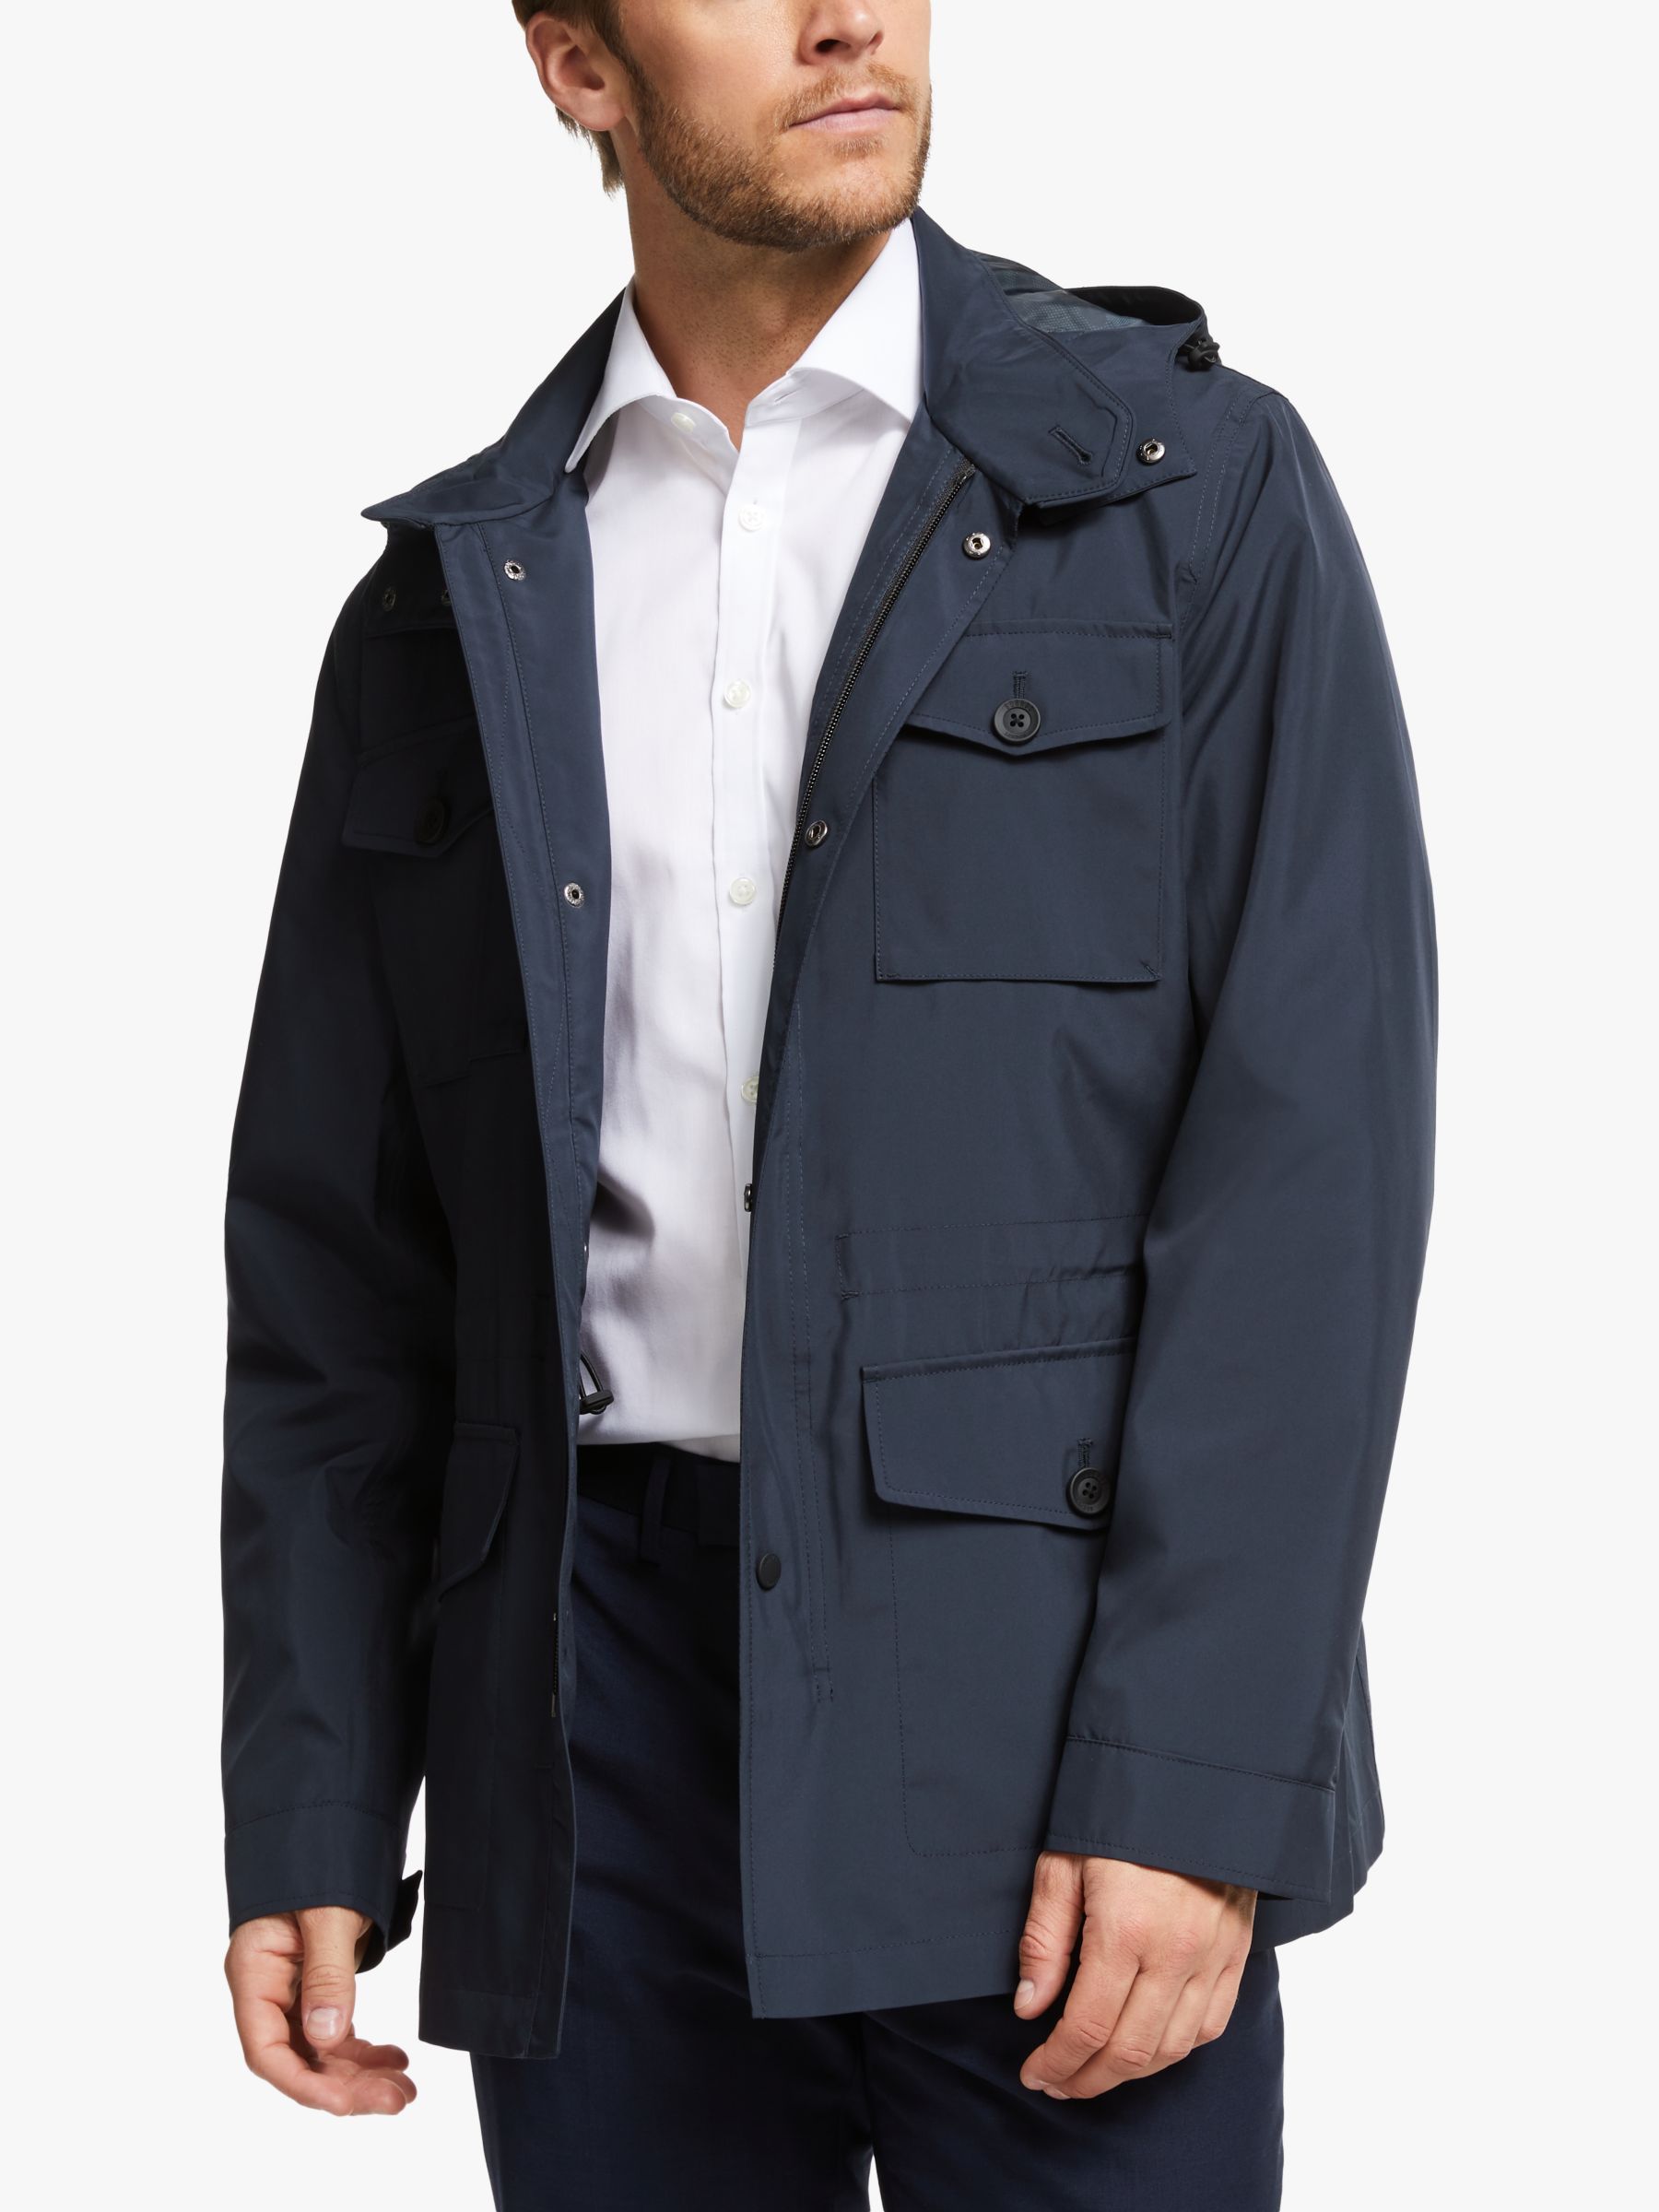 Guards London Gower Waterproof Field Jacket Navy 50R male 55% polyester, 45% recycled polyester